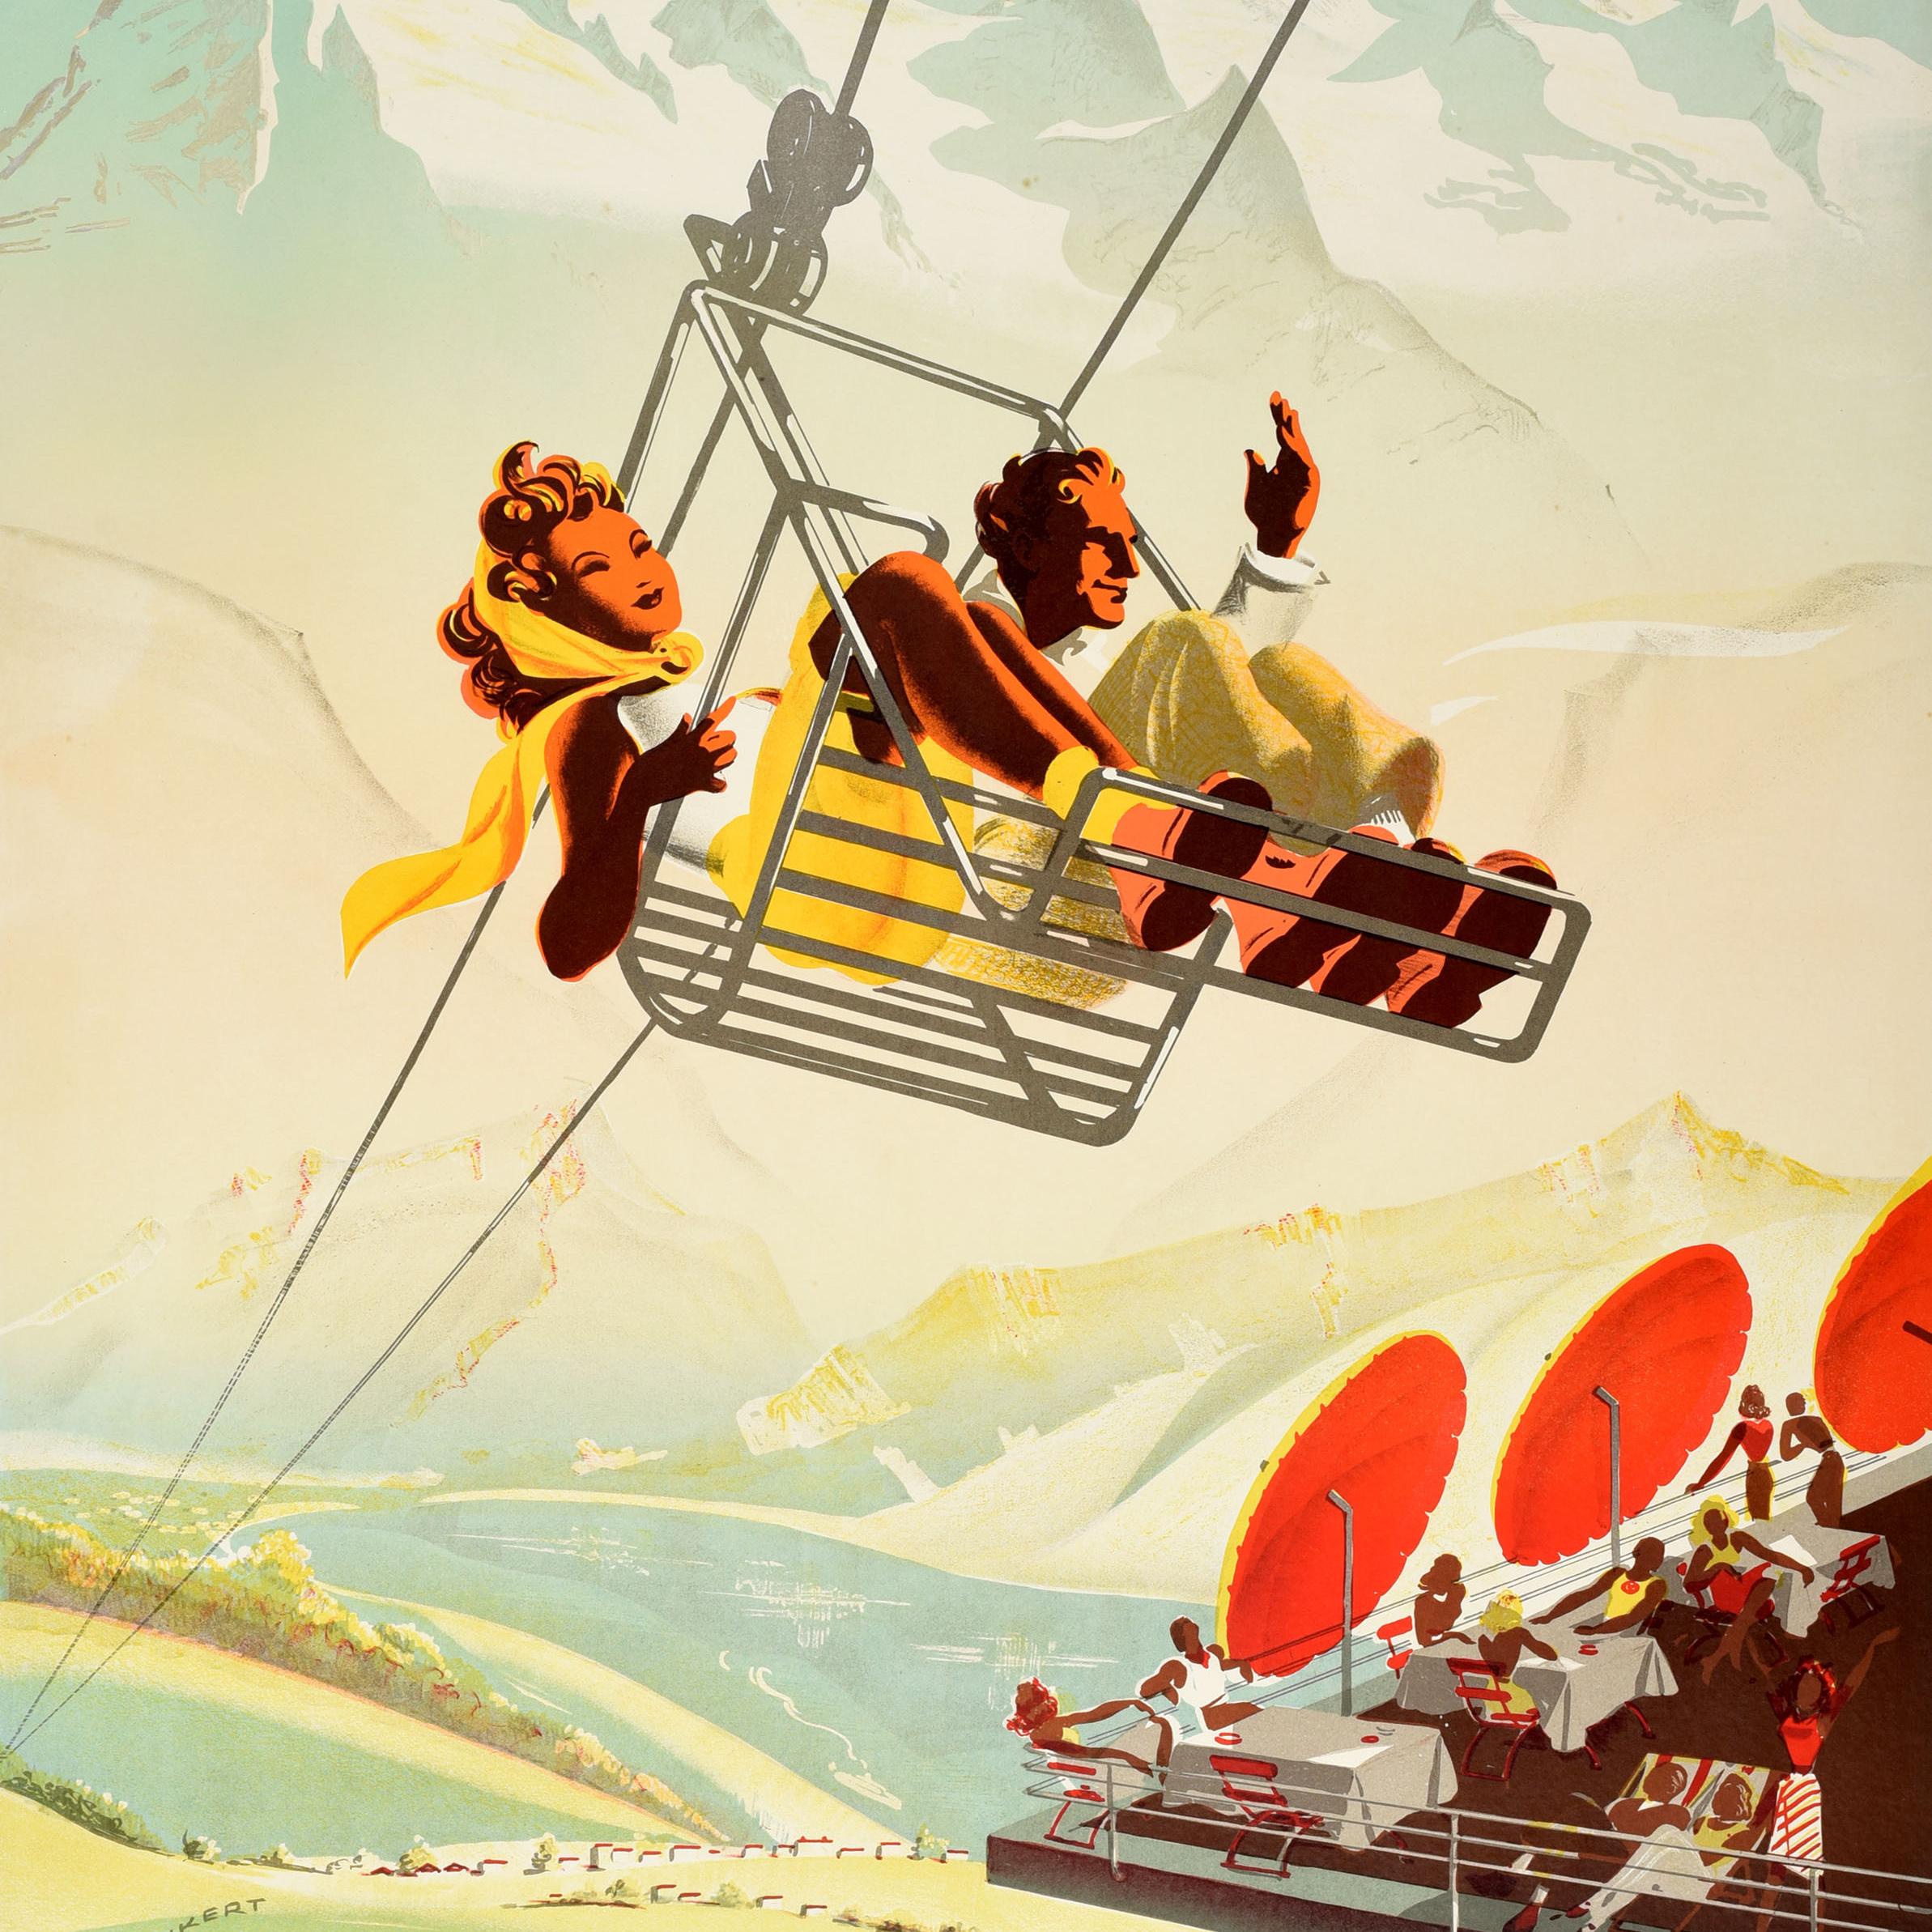 Original vintage summer travel poster for Beatenberg Niederhorn Switzerland Berner Oberland Suisse. Great artwork by Martin Peikert (1901-1975) depicting a fashionably dressed couple on a chair lift with snow topped mountain peaks in the background,